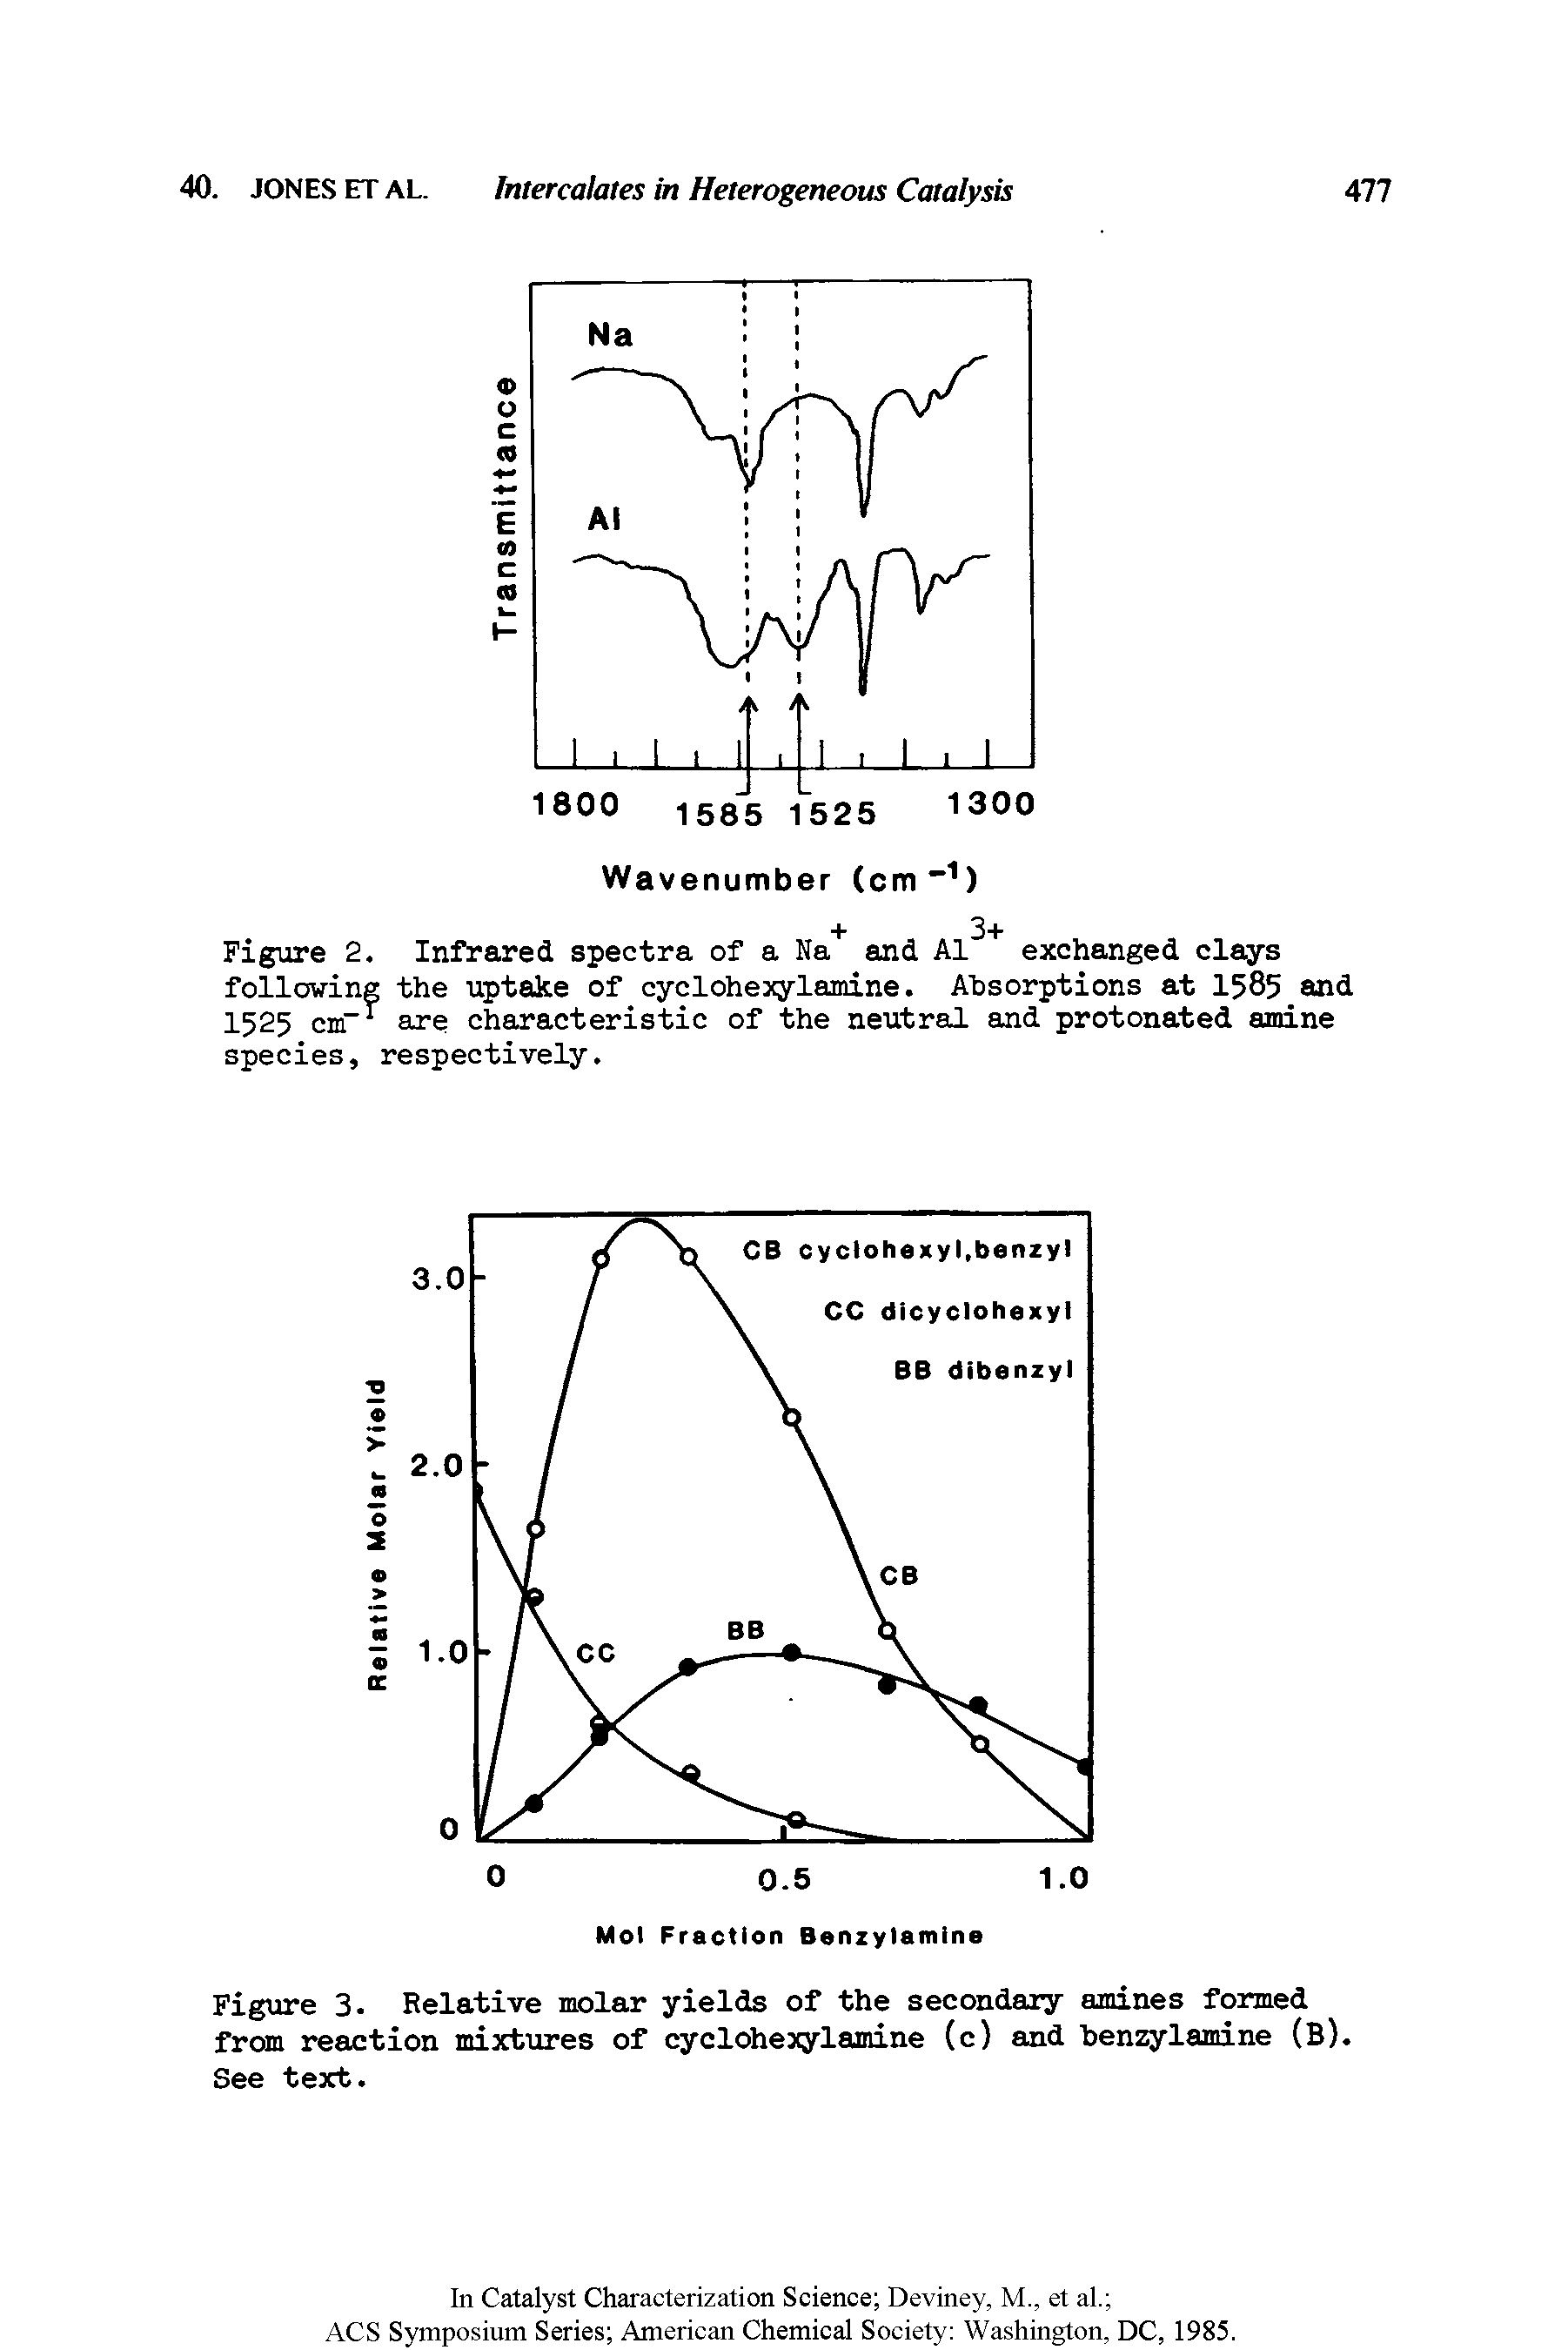 Figure 2. Infrared spectra of a Na" and exchanged clays following the uptake of cyclohexylamine. Absorptions at 1585 and 1525 cnT are characteristic of the neutral and protonated amine species, respectively.